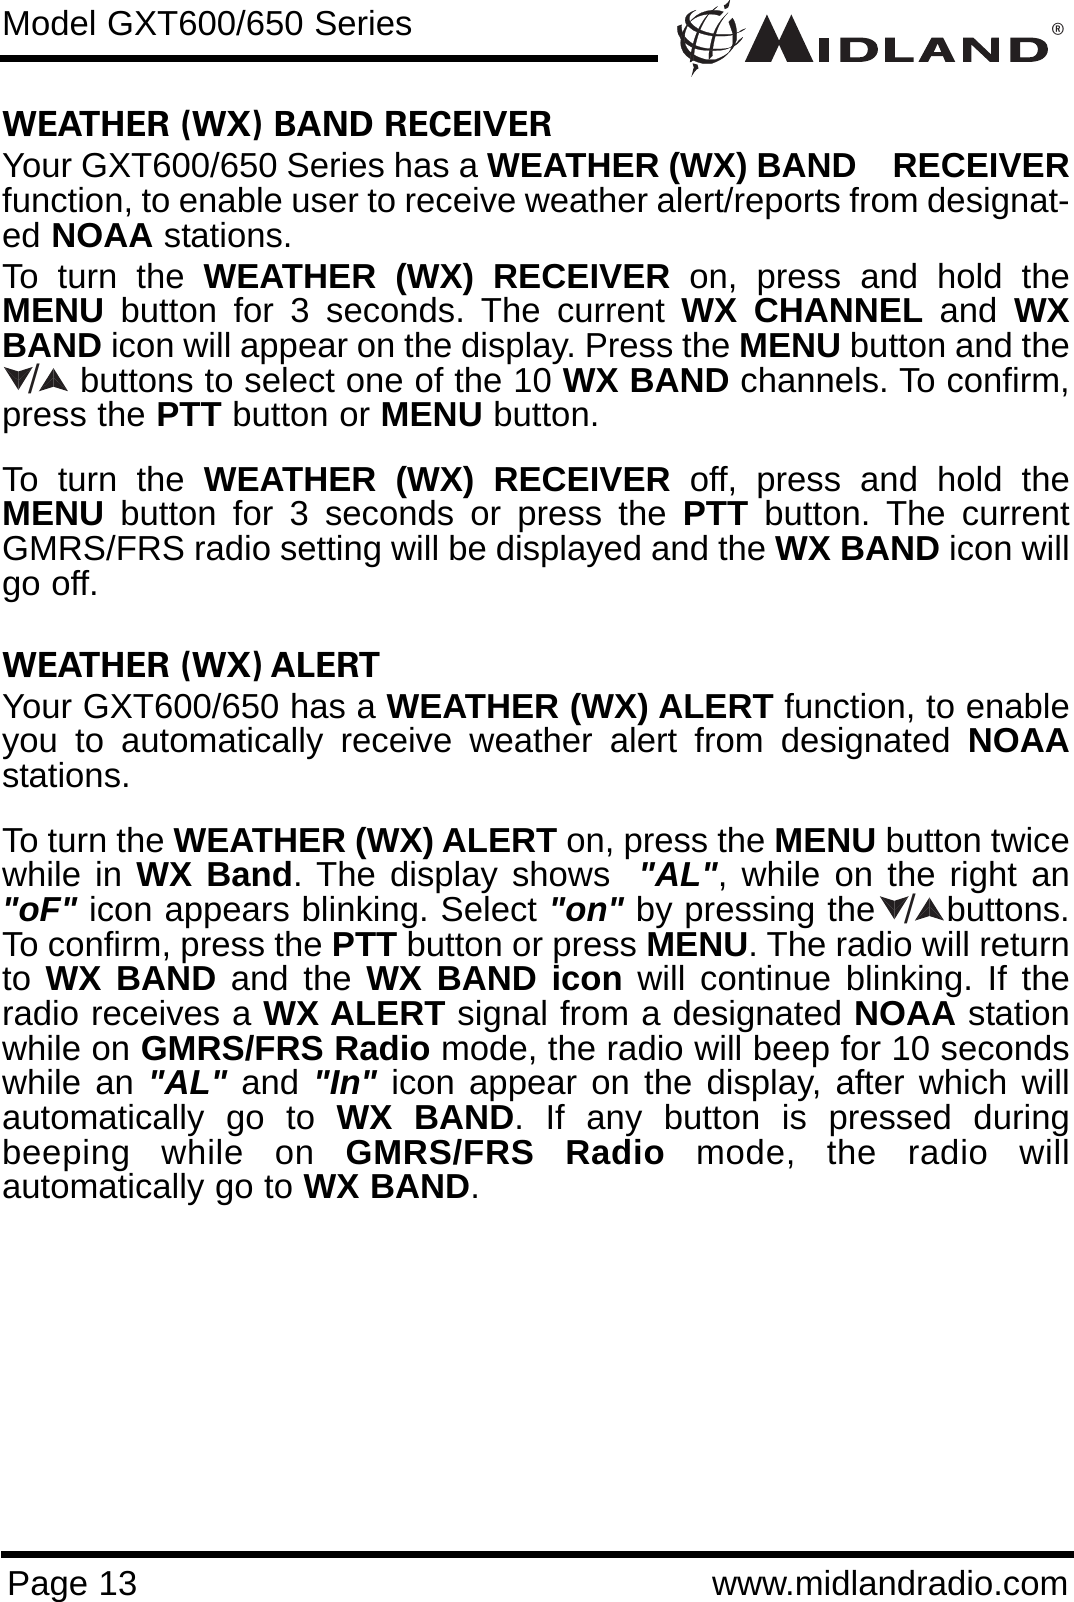 ®Page 13 www.midlandradio.comWEATHER (WX) BAND RECEIVER Your GXT600/650 Series has a WEATHER (WX) BAND    RECEIVERfunction, to enable user to receive weather alert/reports from designat-ed NOAA stations.To turn the WEATHER (WX) RECEIVER on, press and hold theMENU button for 3 seconds. The current WX CHANNEL and  WXBAND icon will appear on the display. Press the MENU button and thebuttons to select one of the 10 WX BAND channels. To confirm,press the PTT button or MENU button. To turn the WEATHER (WX) RECEIVER off, press and hold theMENU button for 3 seconds or press the PTT button. The currentGMRS/FRS radio setting will be displayed and the WX BAND icon willgo off.WEATHER (WX) ALERTYour GXT600/650 has a WEATHER (WX) ALERT function, to enableyou to automatically receive weather alert from designated NOAAstations. To turn the WEATHER (WX) ALERT on, press the MENU button twicewhile in WX Band. The display shows  &quot;AL&quot;, while on the right an&quot;oF&quot; icon appears blinking. Select &quot;on&quot; by pressing the      buttons.To confirm, press the PTT button or press MENU. The radio will returnto WX BAND and the WX BAND icon will continue blinking. If theradio receives a WX ALERT signal from a designated NOAA stationwhile on GMRS/FRS Radio mode, the radio will beep for 10 secondswhile an &quot;AL&quot; and &quot;In&quot; icon appear on the display, after which willautomatically go to WX BAND. If any button is pressed duringbeeping while on GMRS/FRS Radio mode, the radio willautomatically go to WX BAND.Model GXT600/650 Series//